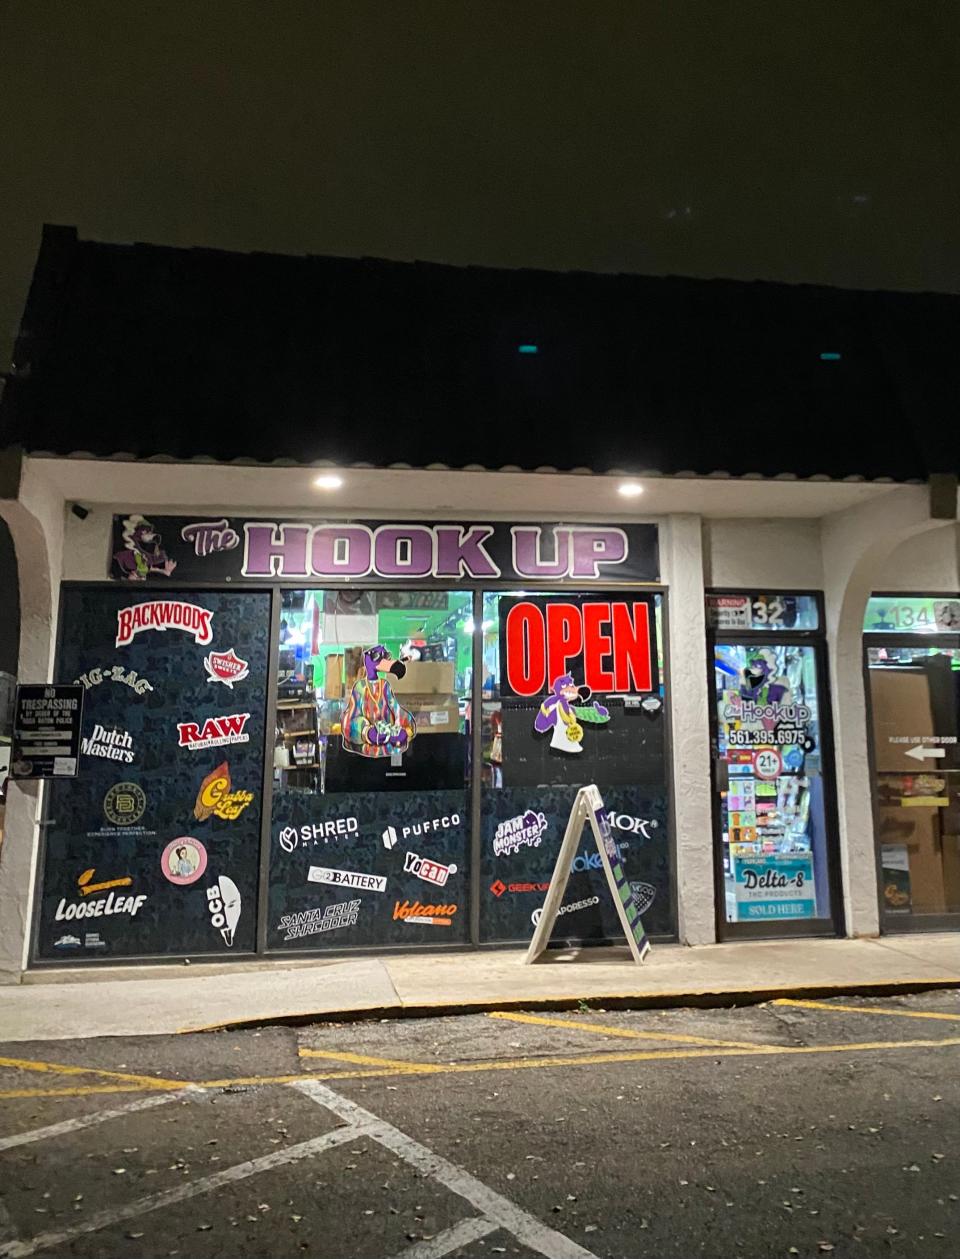 The Hook Up is one of the best-known vape shops in East Boca Raton.